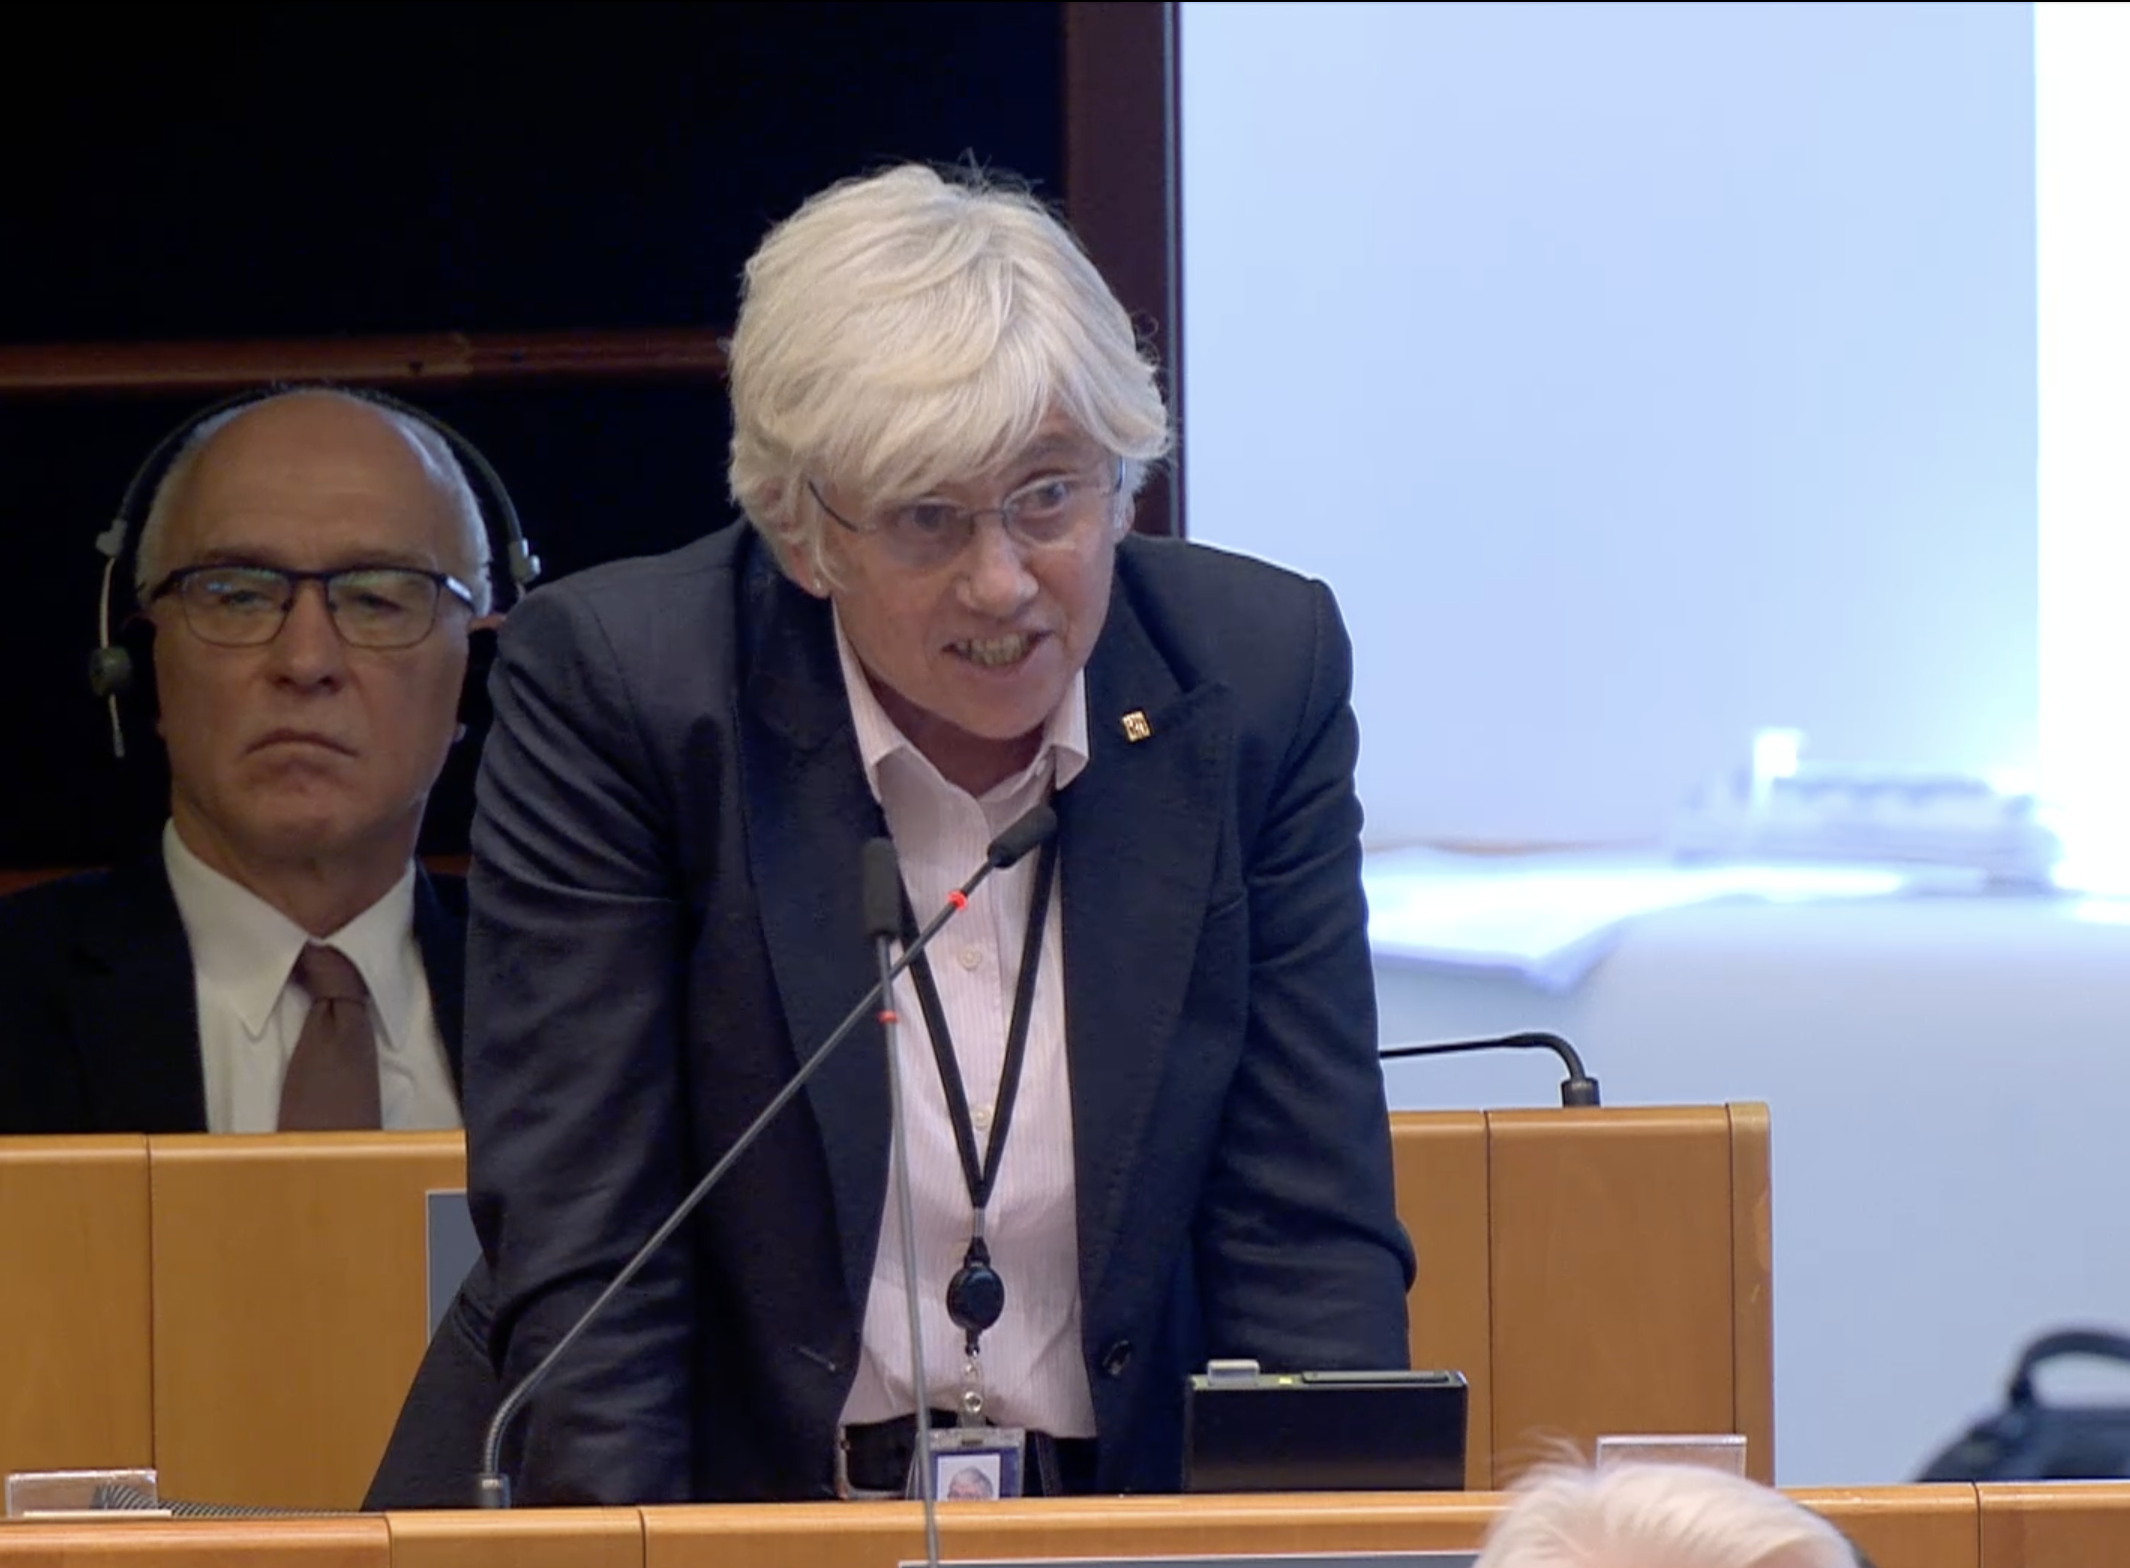 Clara Ponsatí confronts the European Parliament's president and provokes a dispute in the plenary